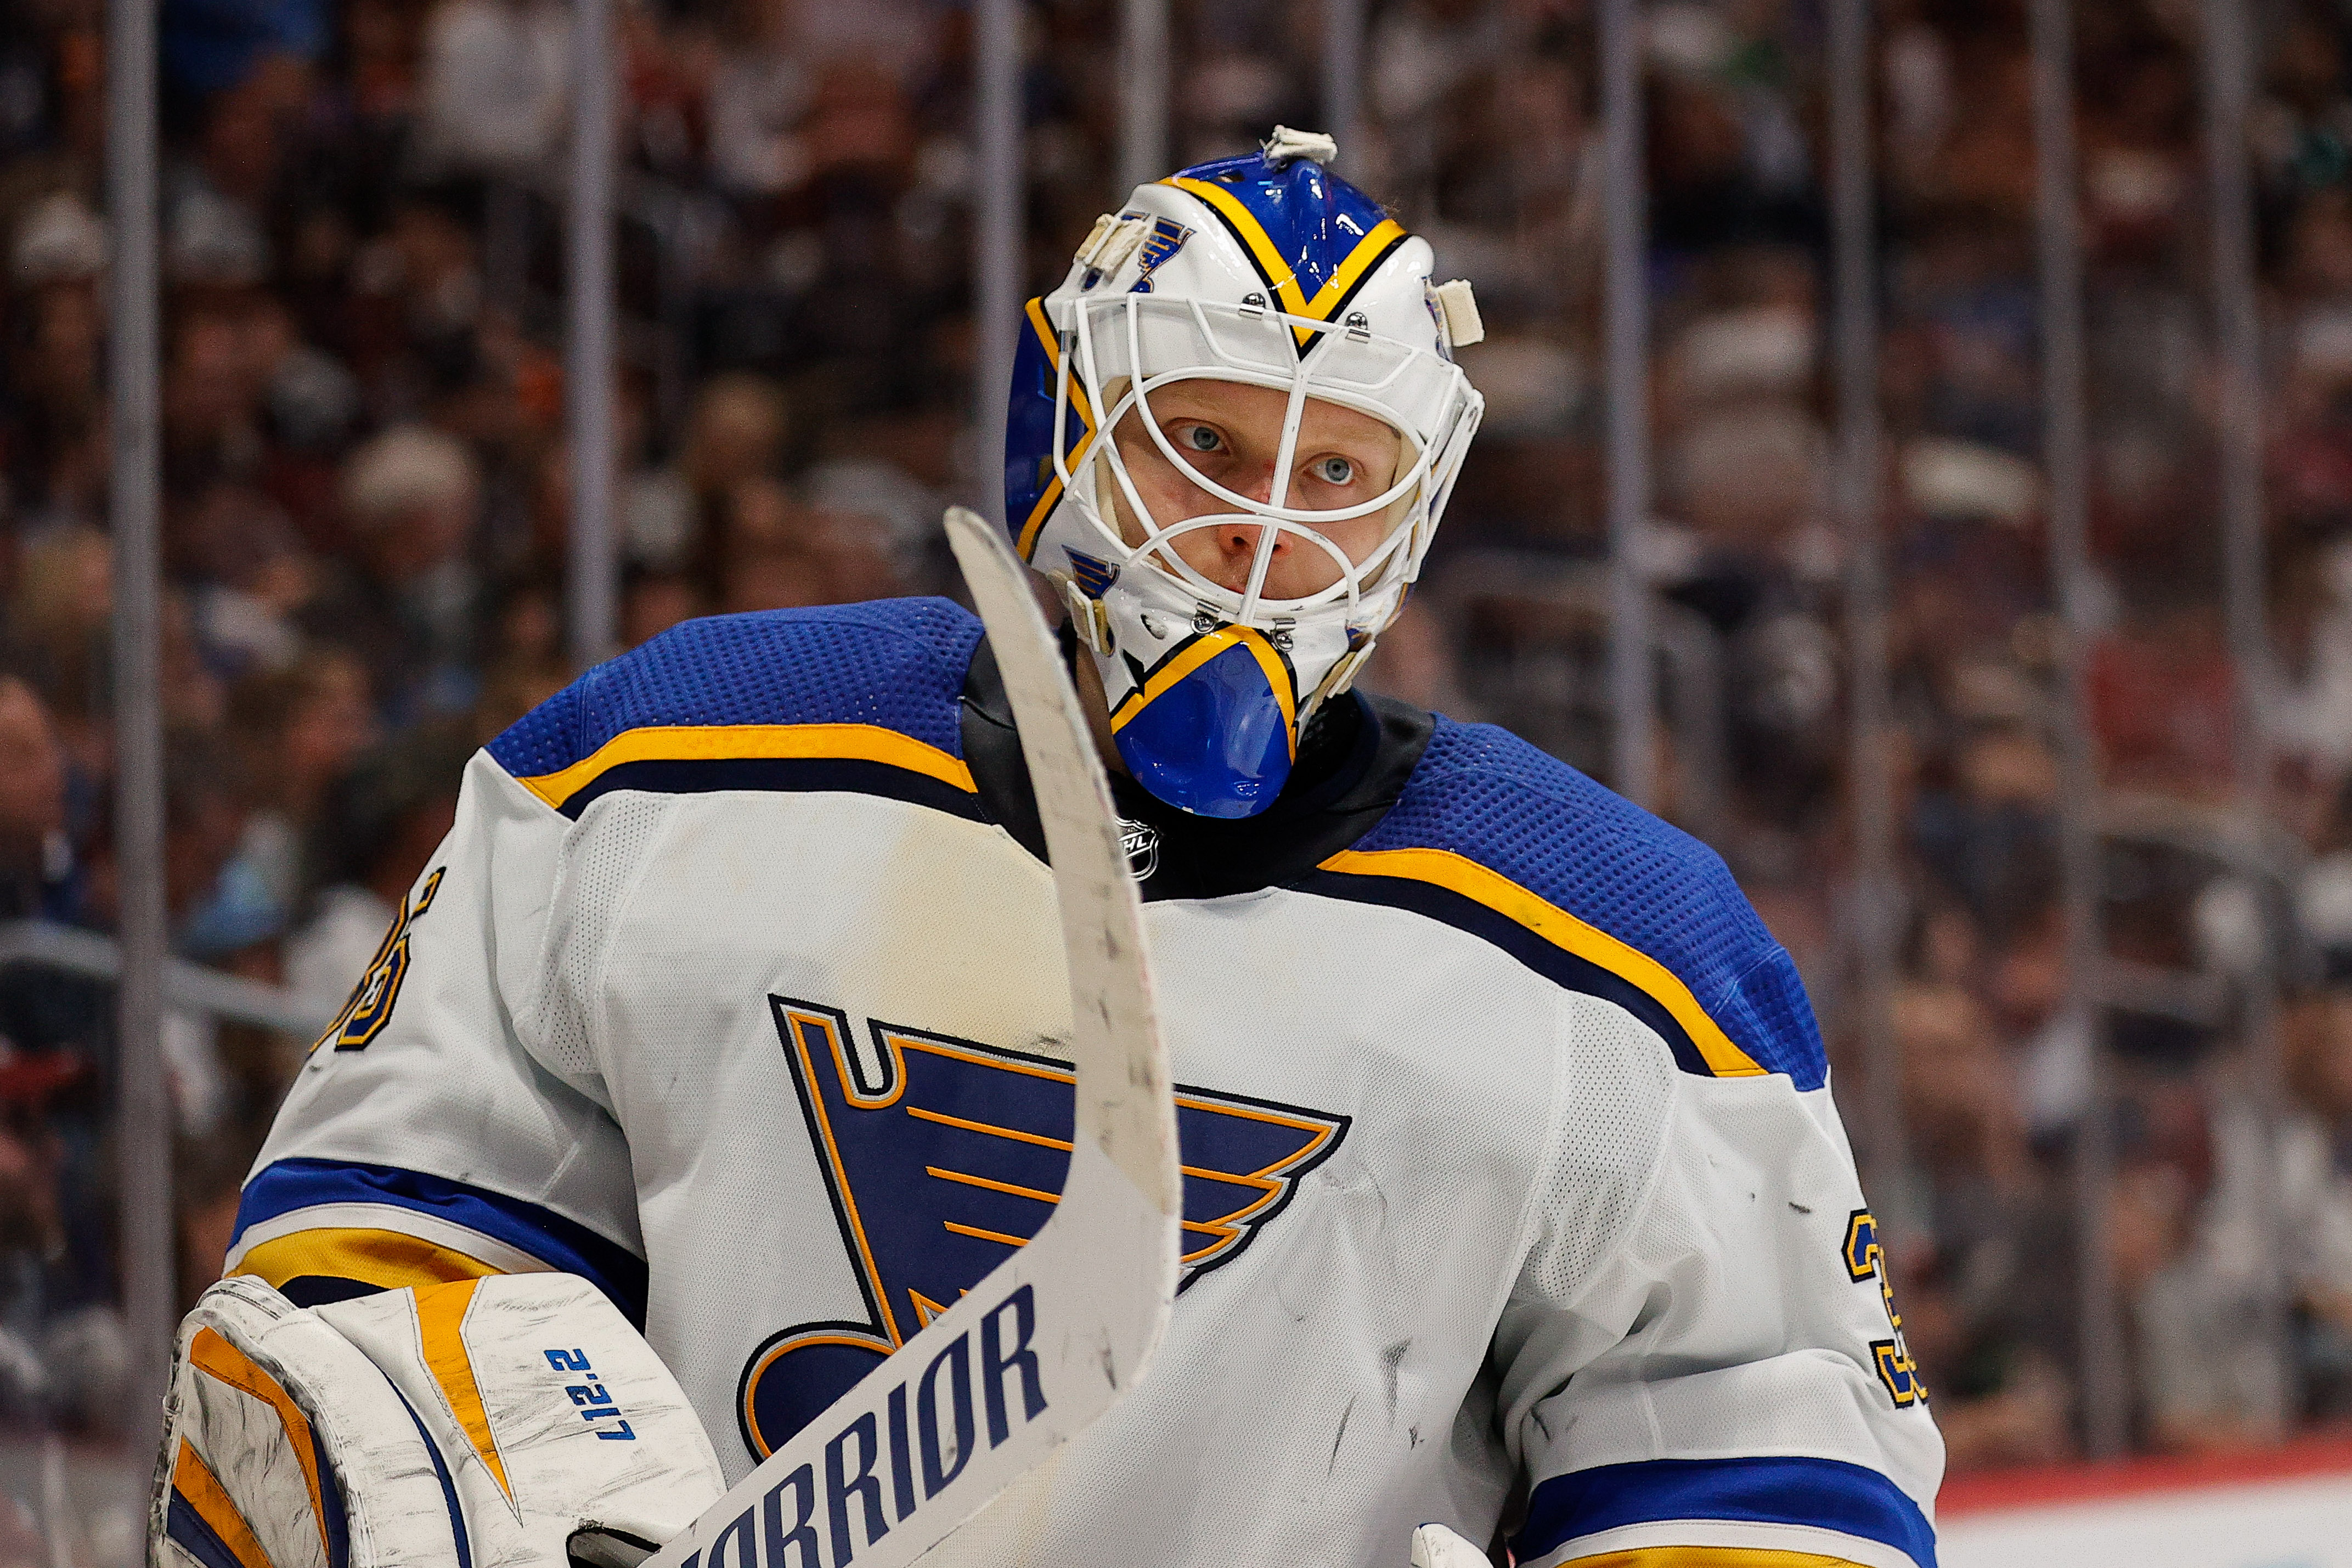 Ville Husso's 4 Likeliest Free-Agent Destinations if He Leaves the